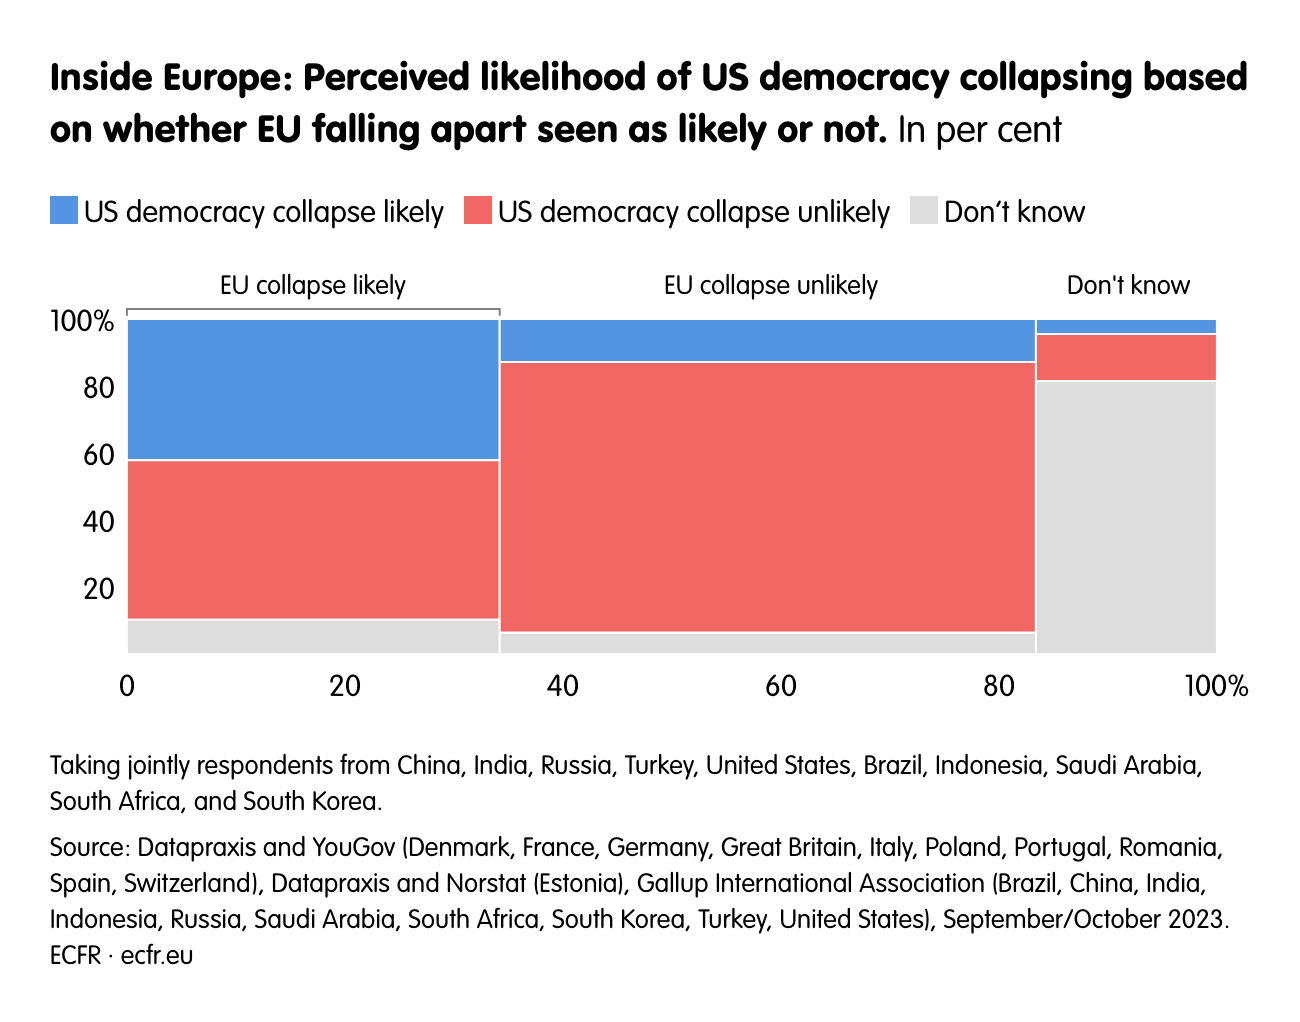 Inside Europe: Perceived likelihood of US democracy collapsing based on whether EU falling apart seen as likely or not.